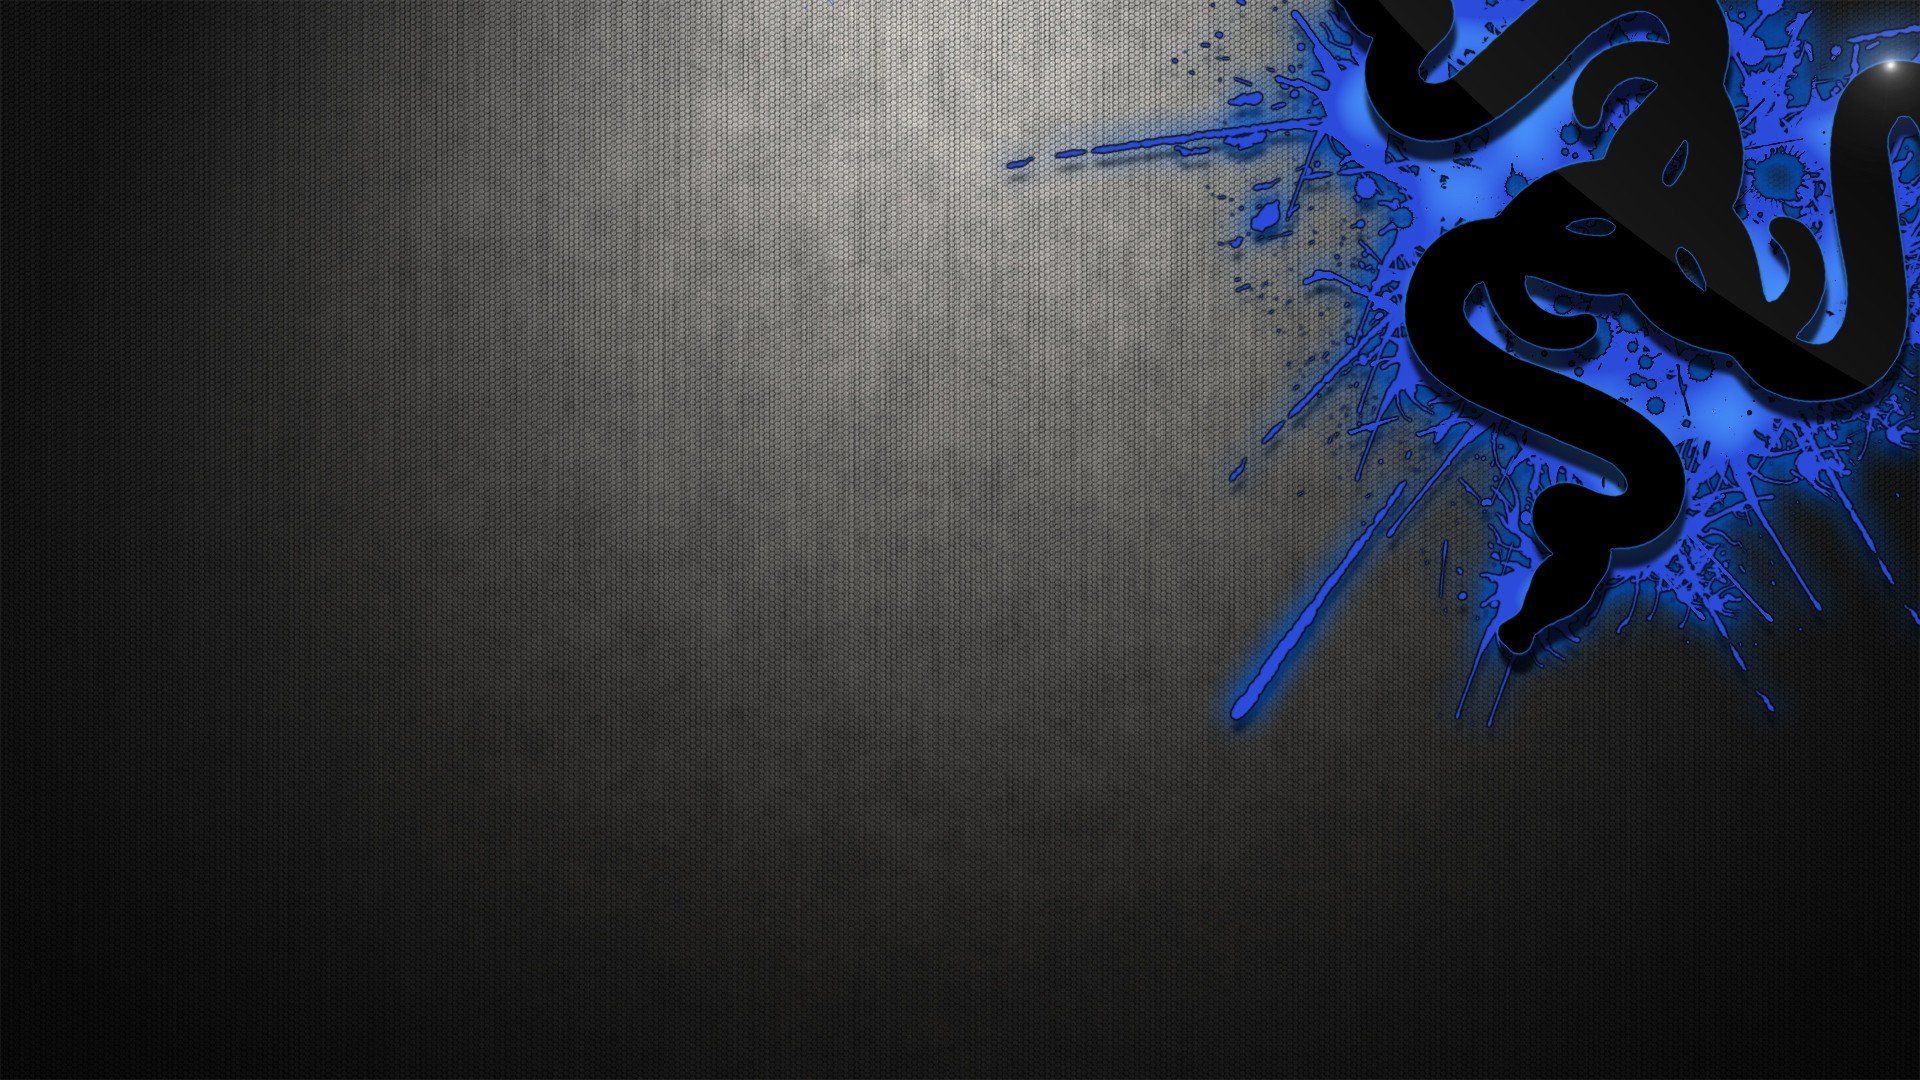 Black and Blue Gaming Wallpapers on